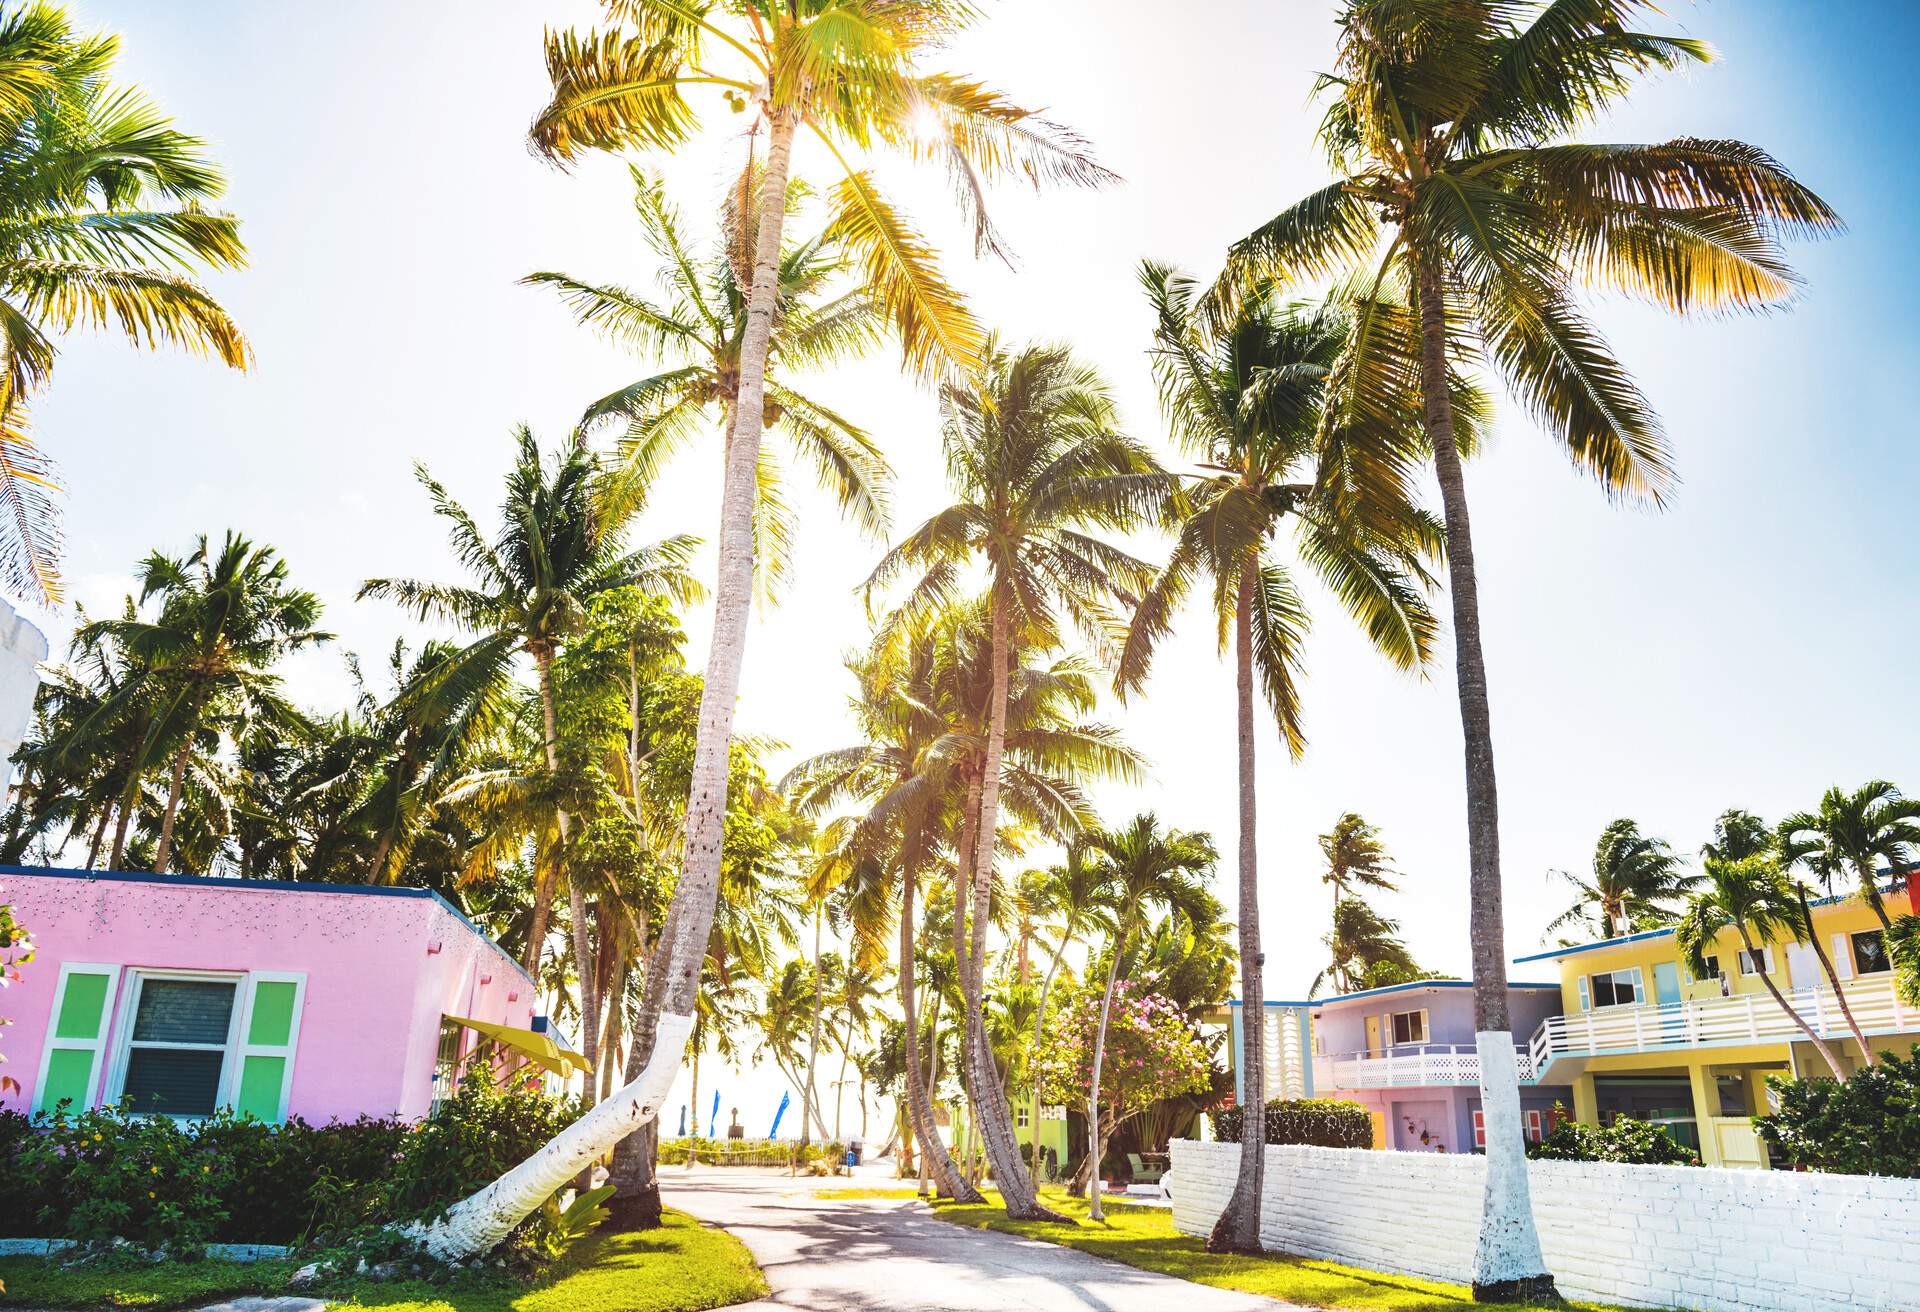 DEST_USA_FLORIDA_KEY_WEST palm trees neighborhood homes-GettyImages-639869060